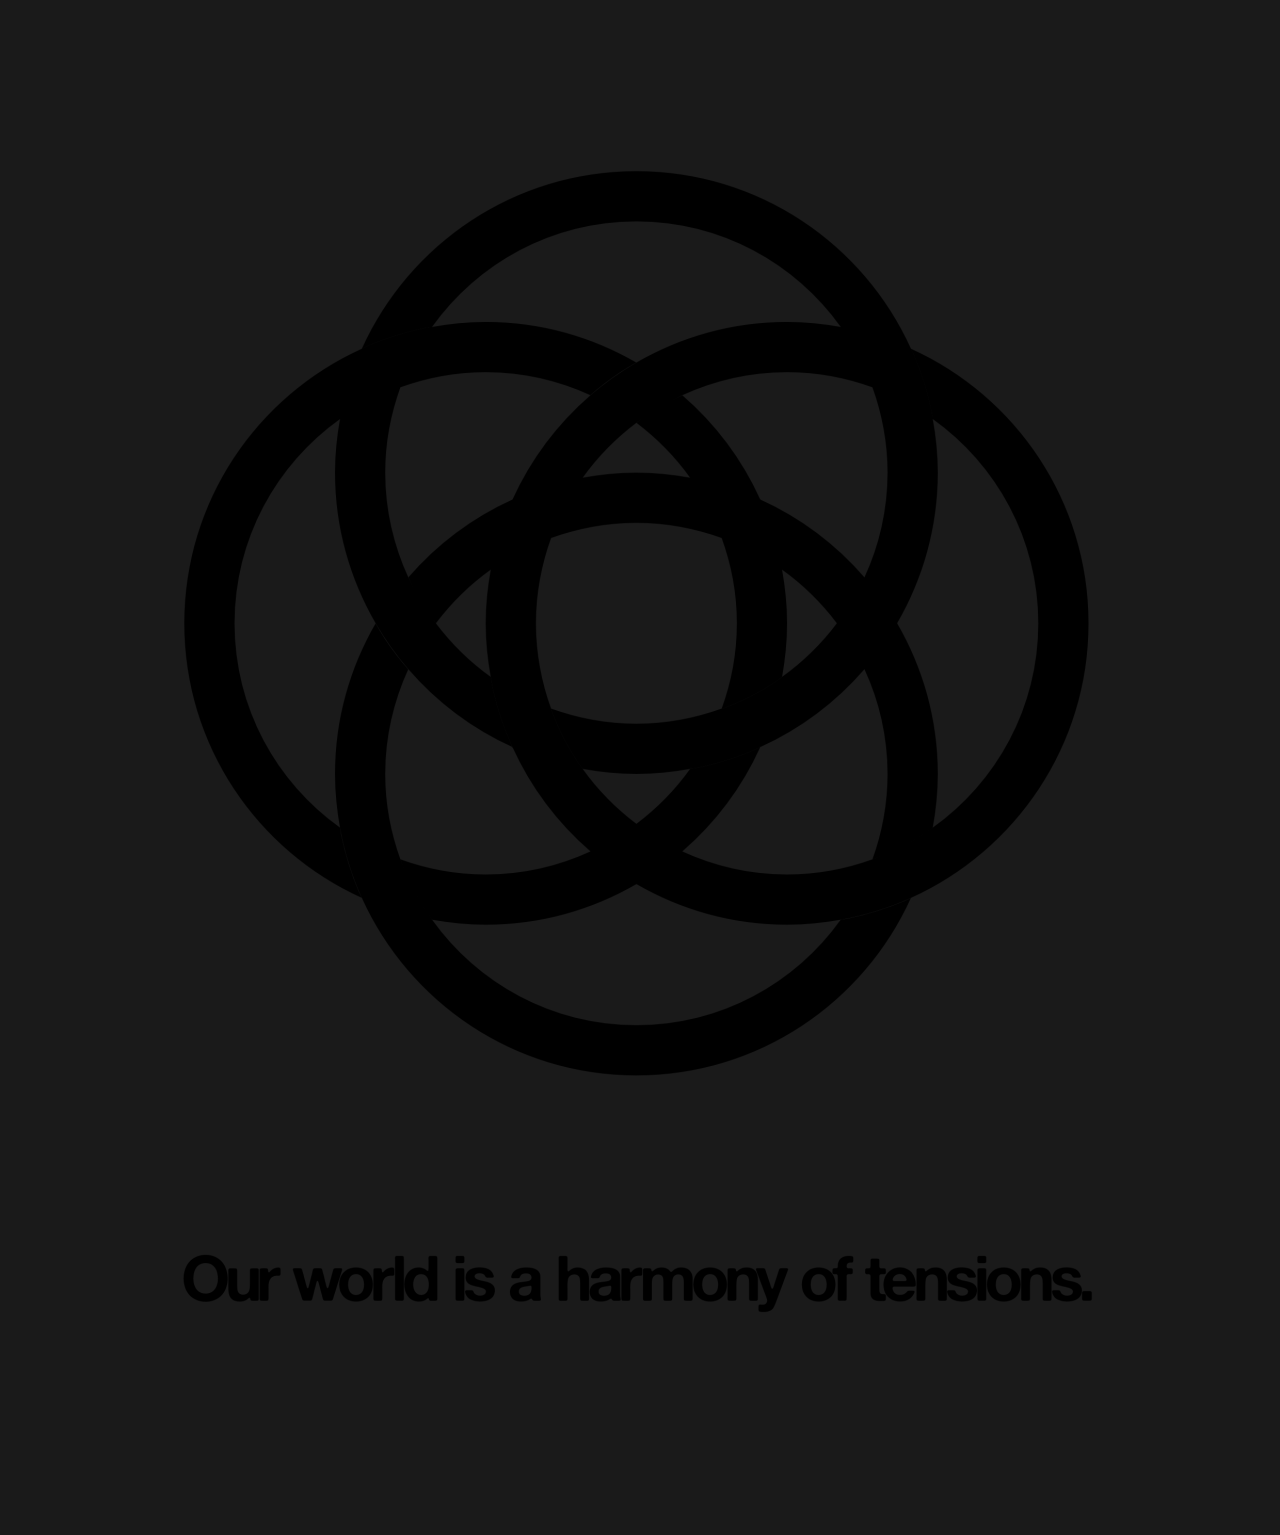 Our world is a harmony of tensions.
-Heraclitus